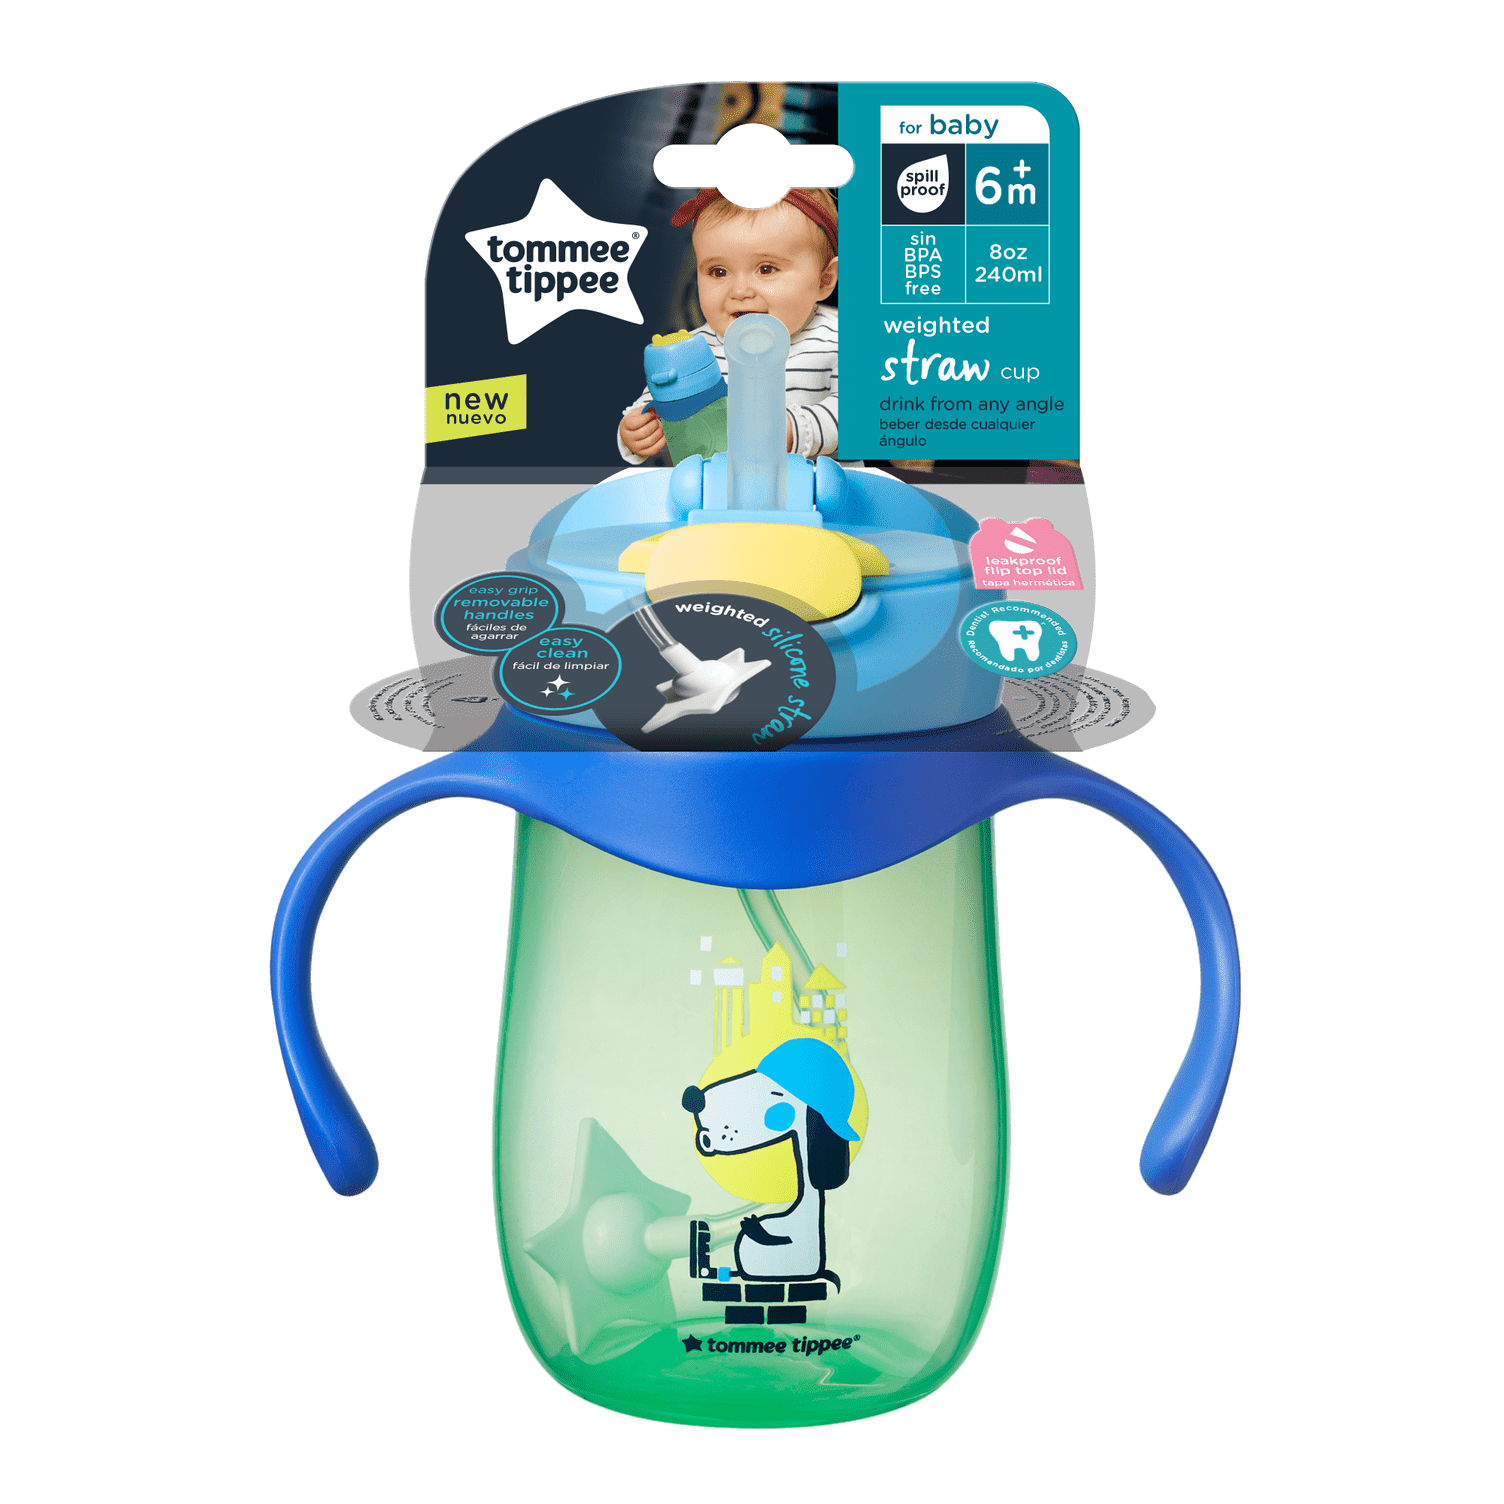 Tommee Tippee Superstar Weighted Straw Cup for Toddlers, 6 months+, 10oz,  Shake and Spill-Proof, Ant…See more Tommee Tippee Superstar Weighted Straw